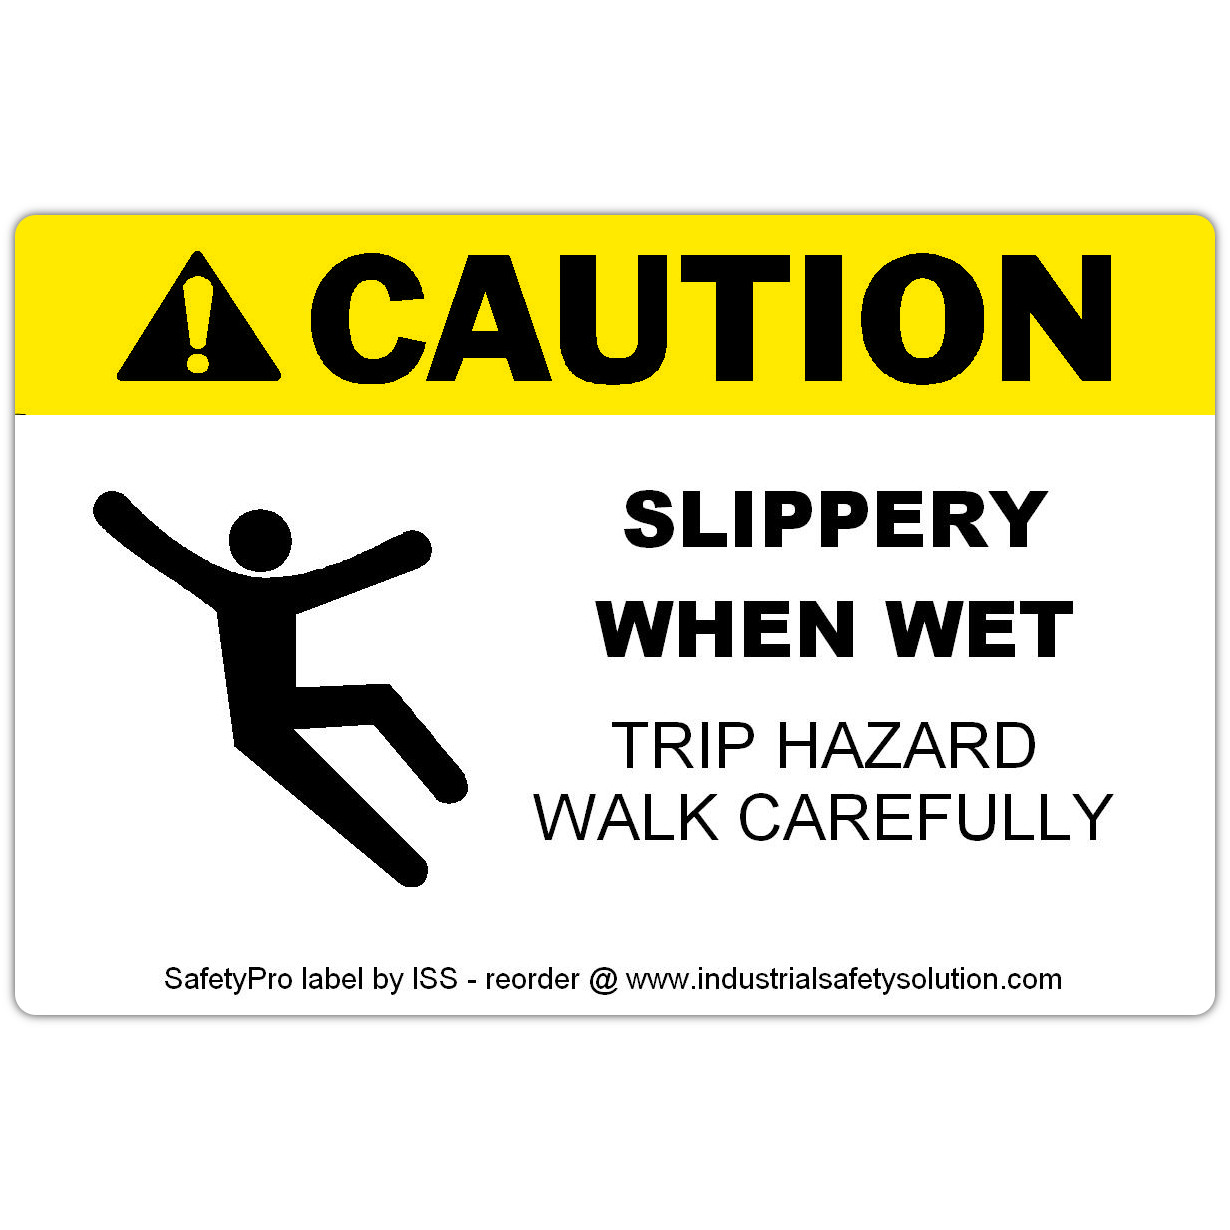 Detail view for 4" x 6" CAUTION Slippery When Wet Safety Label